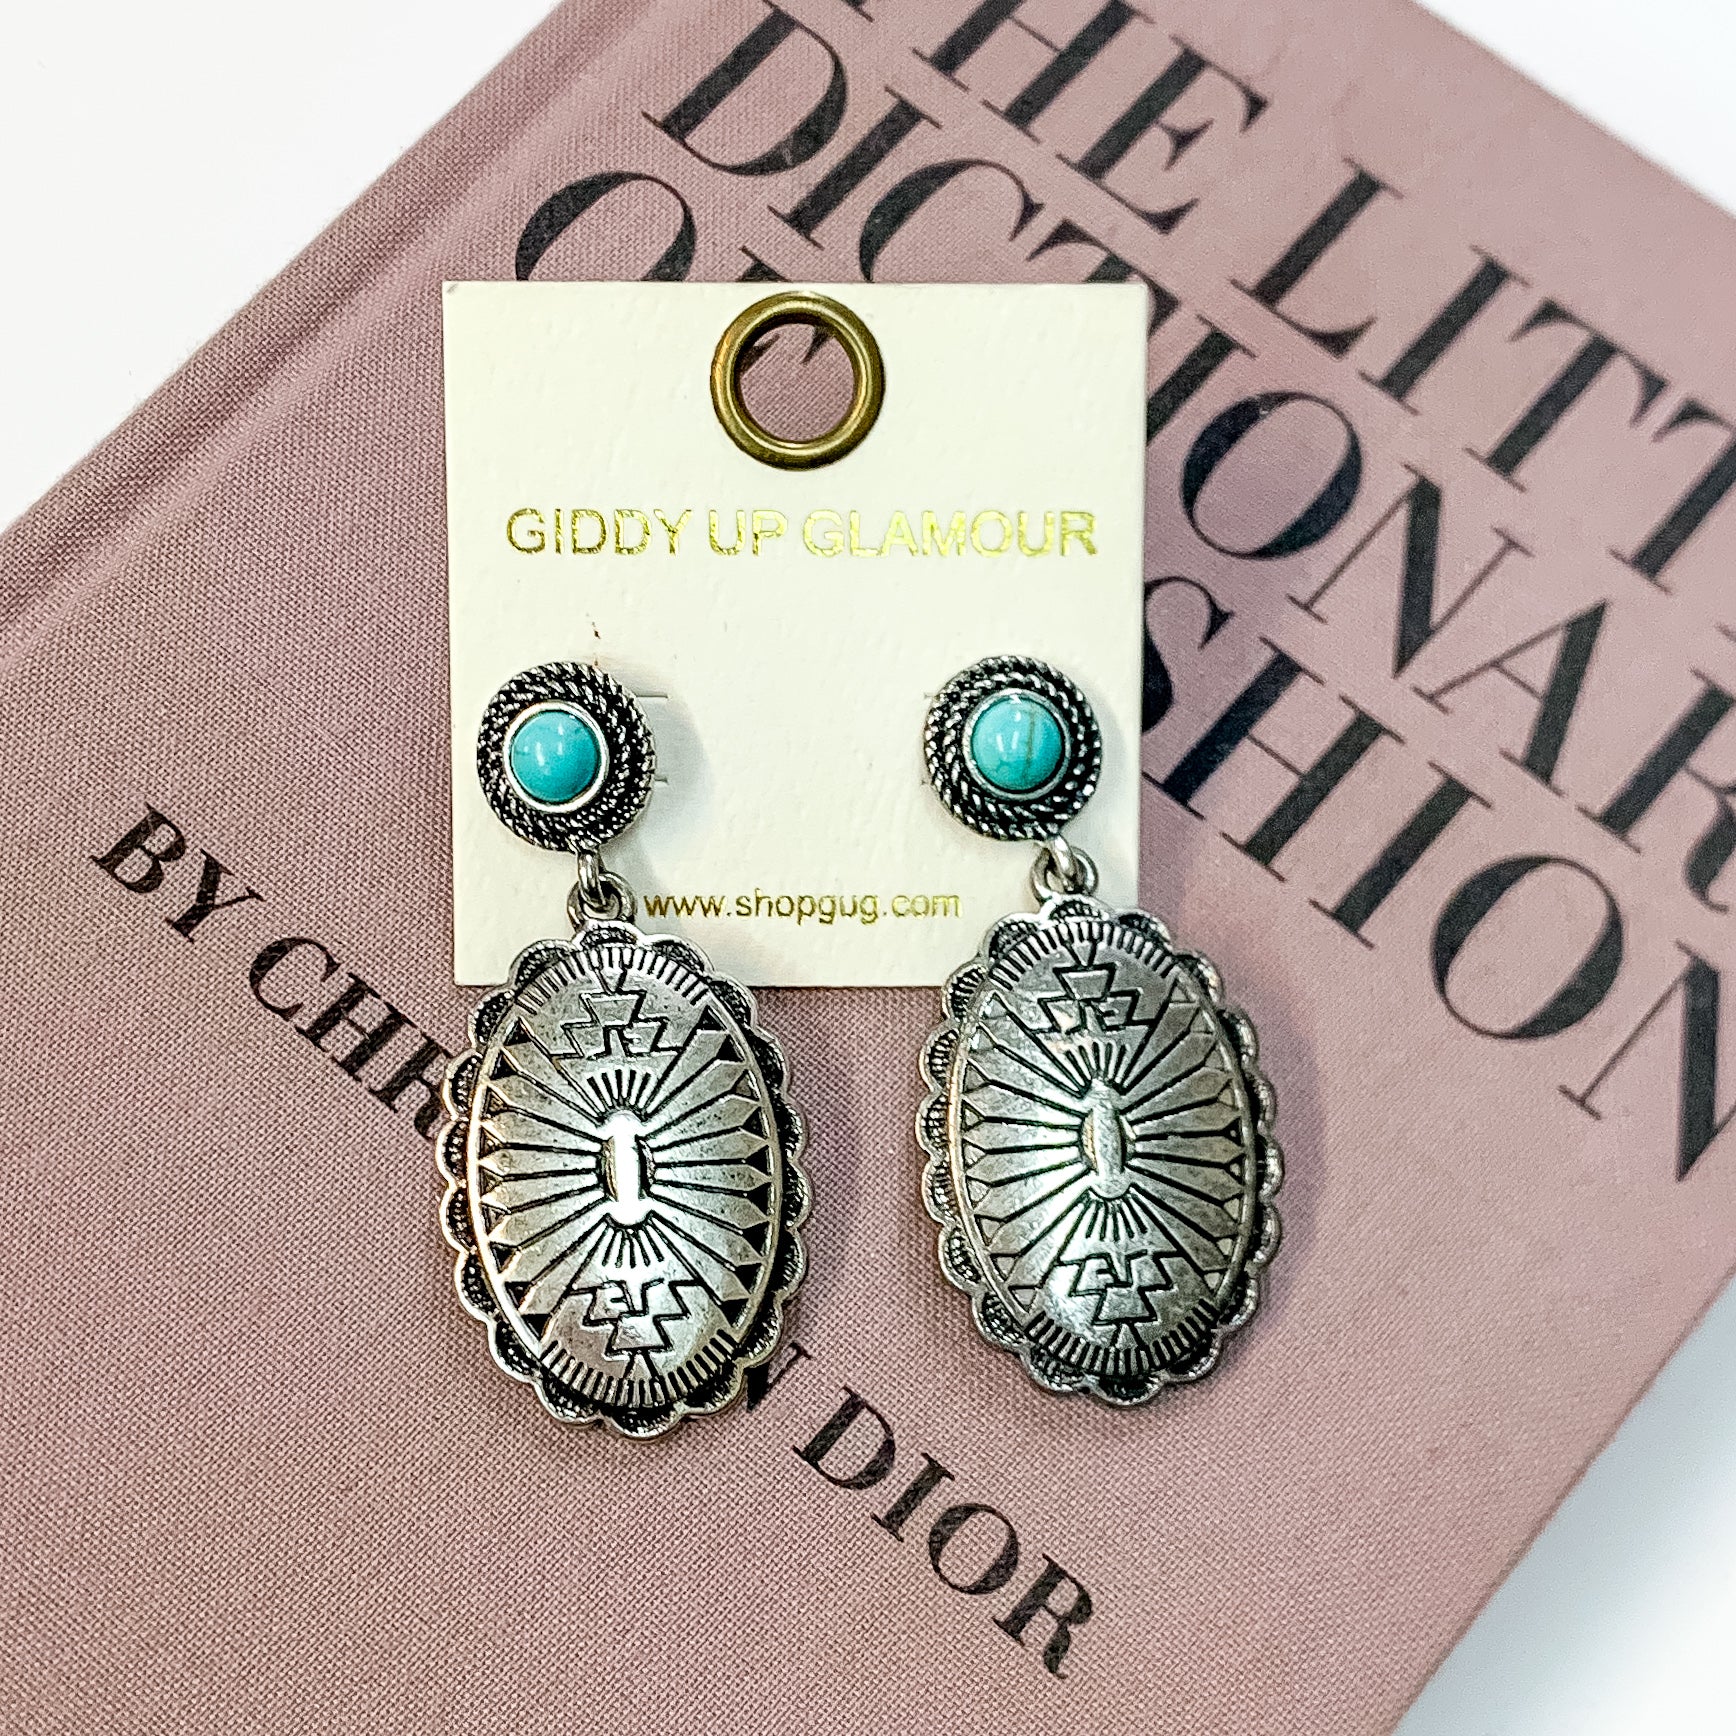 Small Turquoise Blue Stud Earrings with Oval Concho Drop in Silver Tone - Giddy Up Glamour Boutique